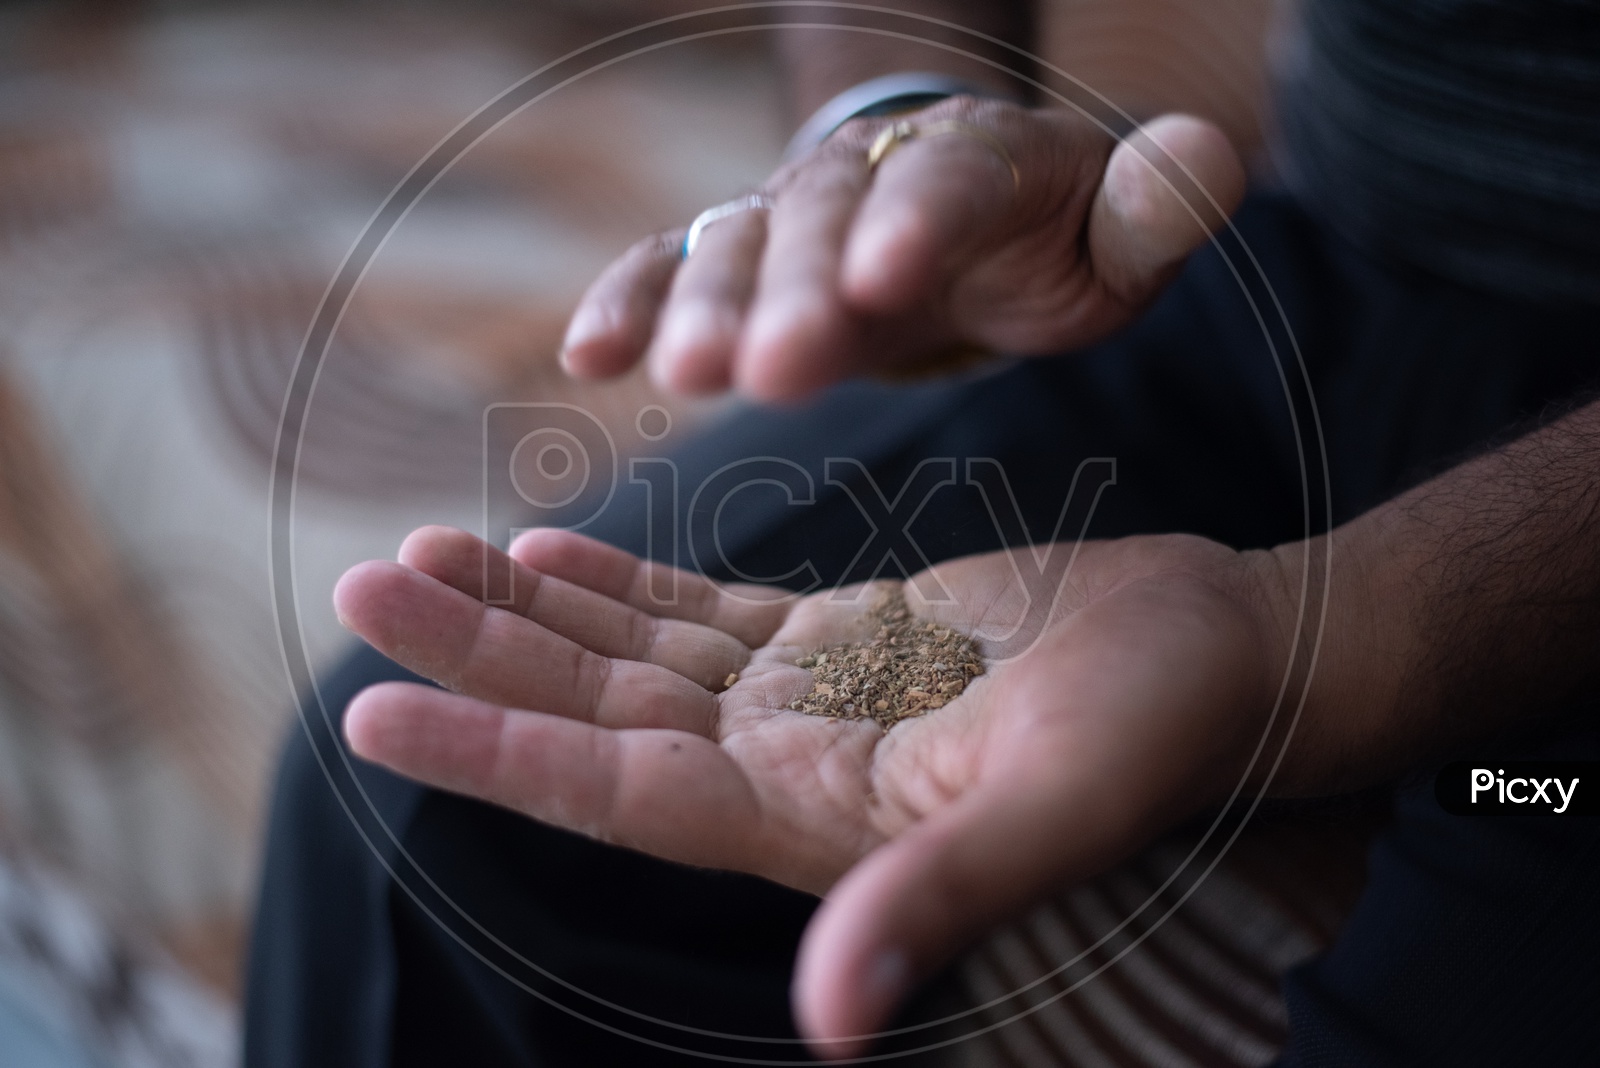 A Young Indian Man Attrition The Marijuna Or Ganja or Weed Leafs  In Hand Closeup